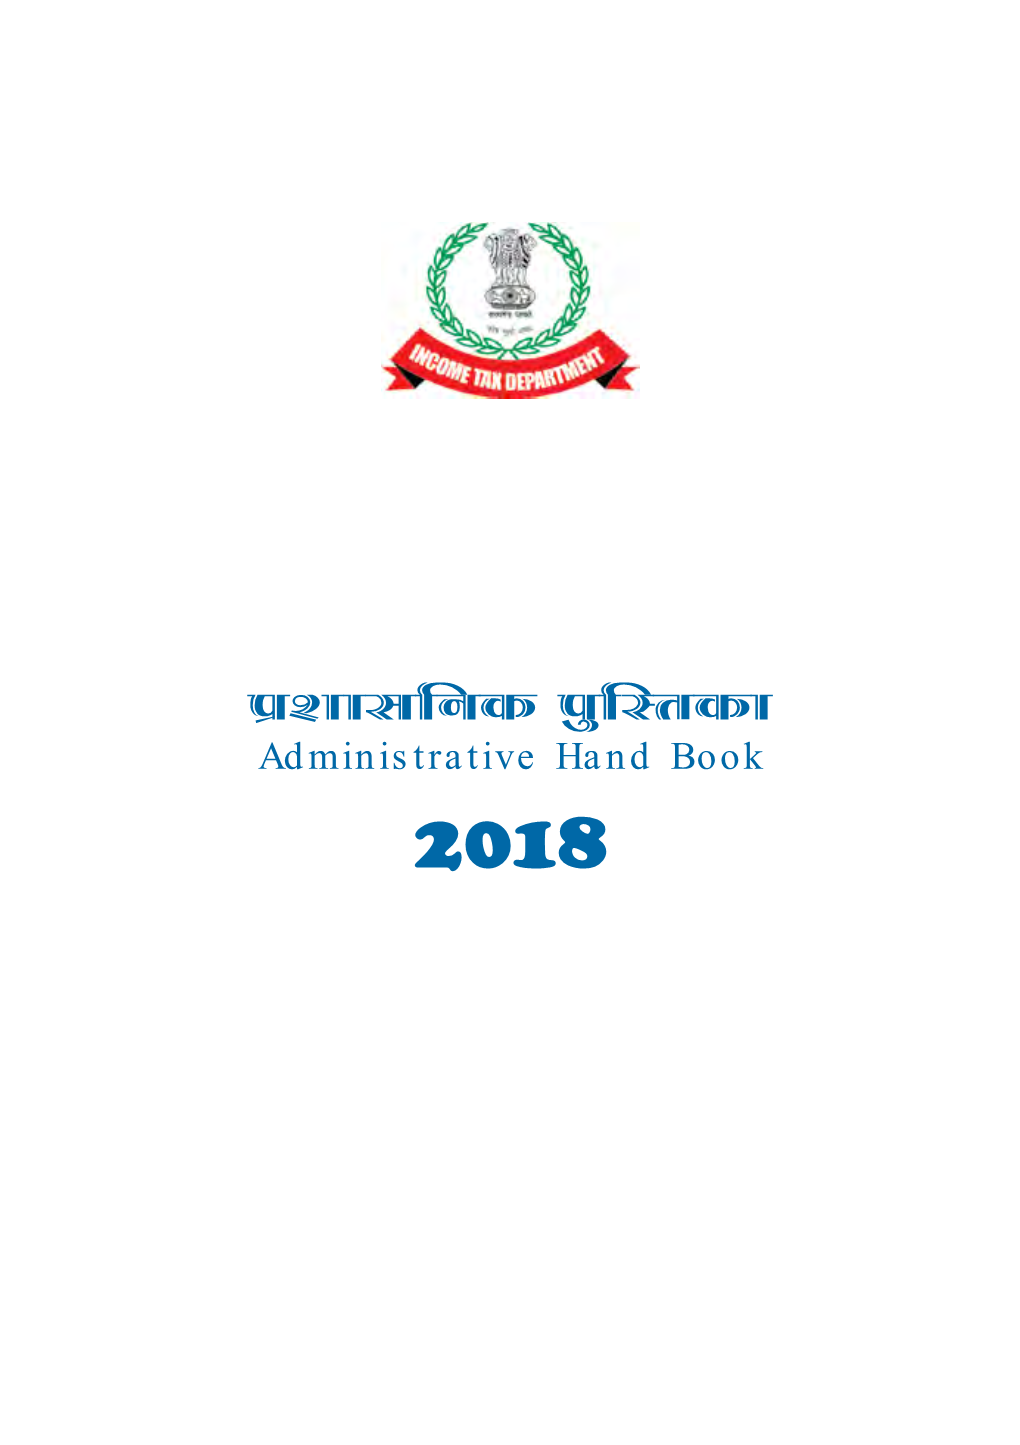 Iz'kklfud Iqflrdk Administrative Hand Book 2018 Data Has Been Compiled Based on the Information Received from Various Offices Upto 20Th December, 2017